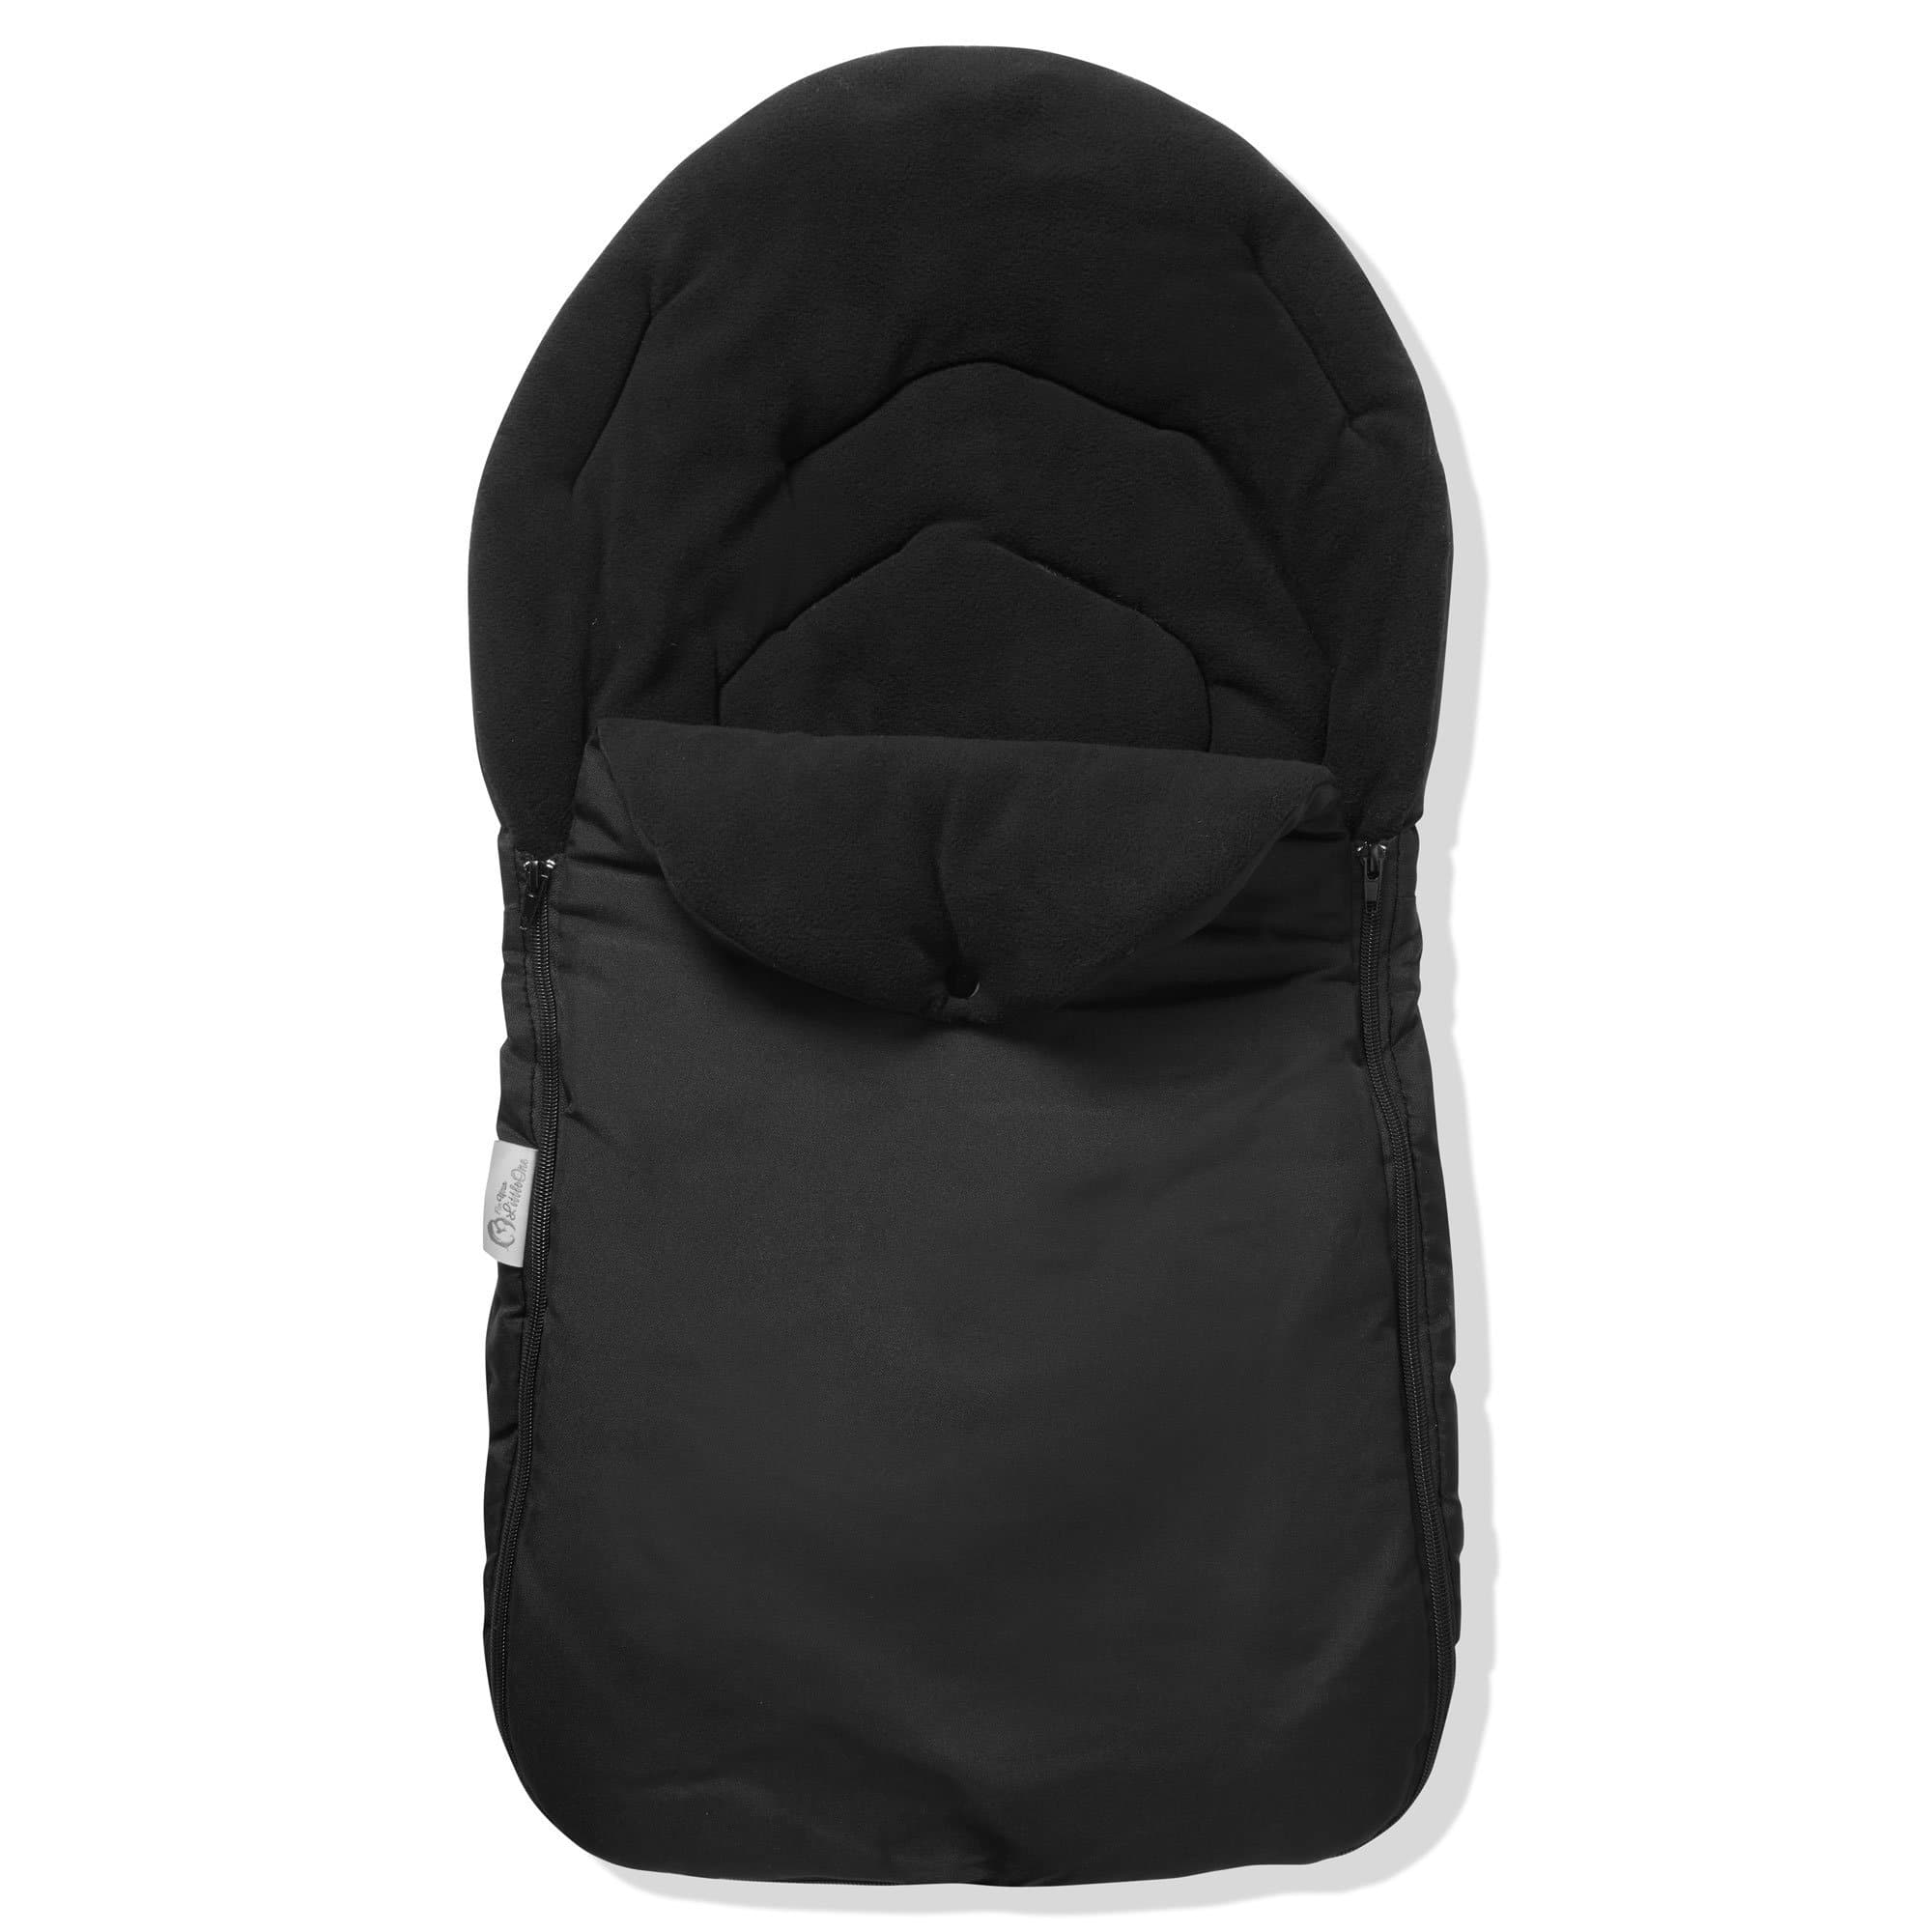 Car Seat Footmuff / Cosy Toes Compatible with Cosatto - Black / Fits All Models | For Your Little One